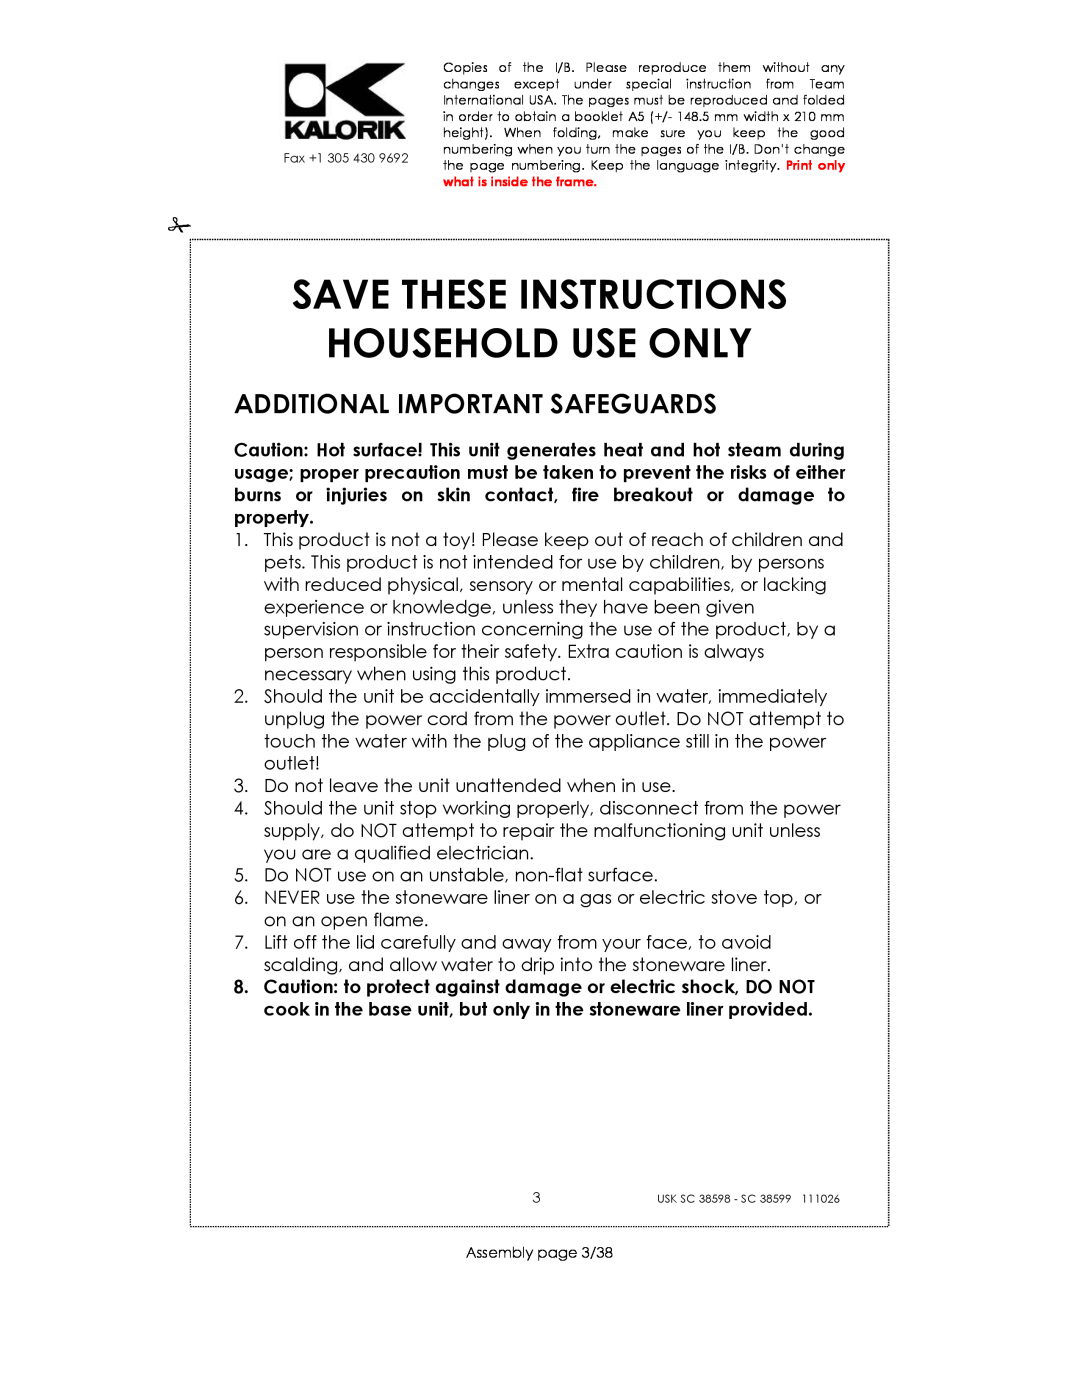 Kalorik 38599, usk sc 38598 manual Save These Instructions Household Use Only, Additional Important Safeguards 